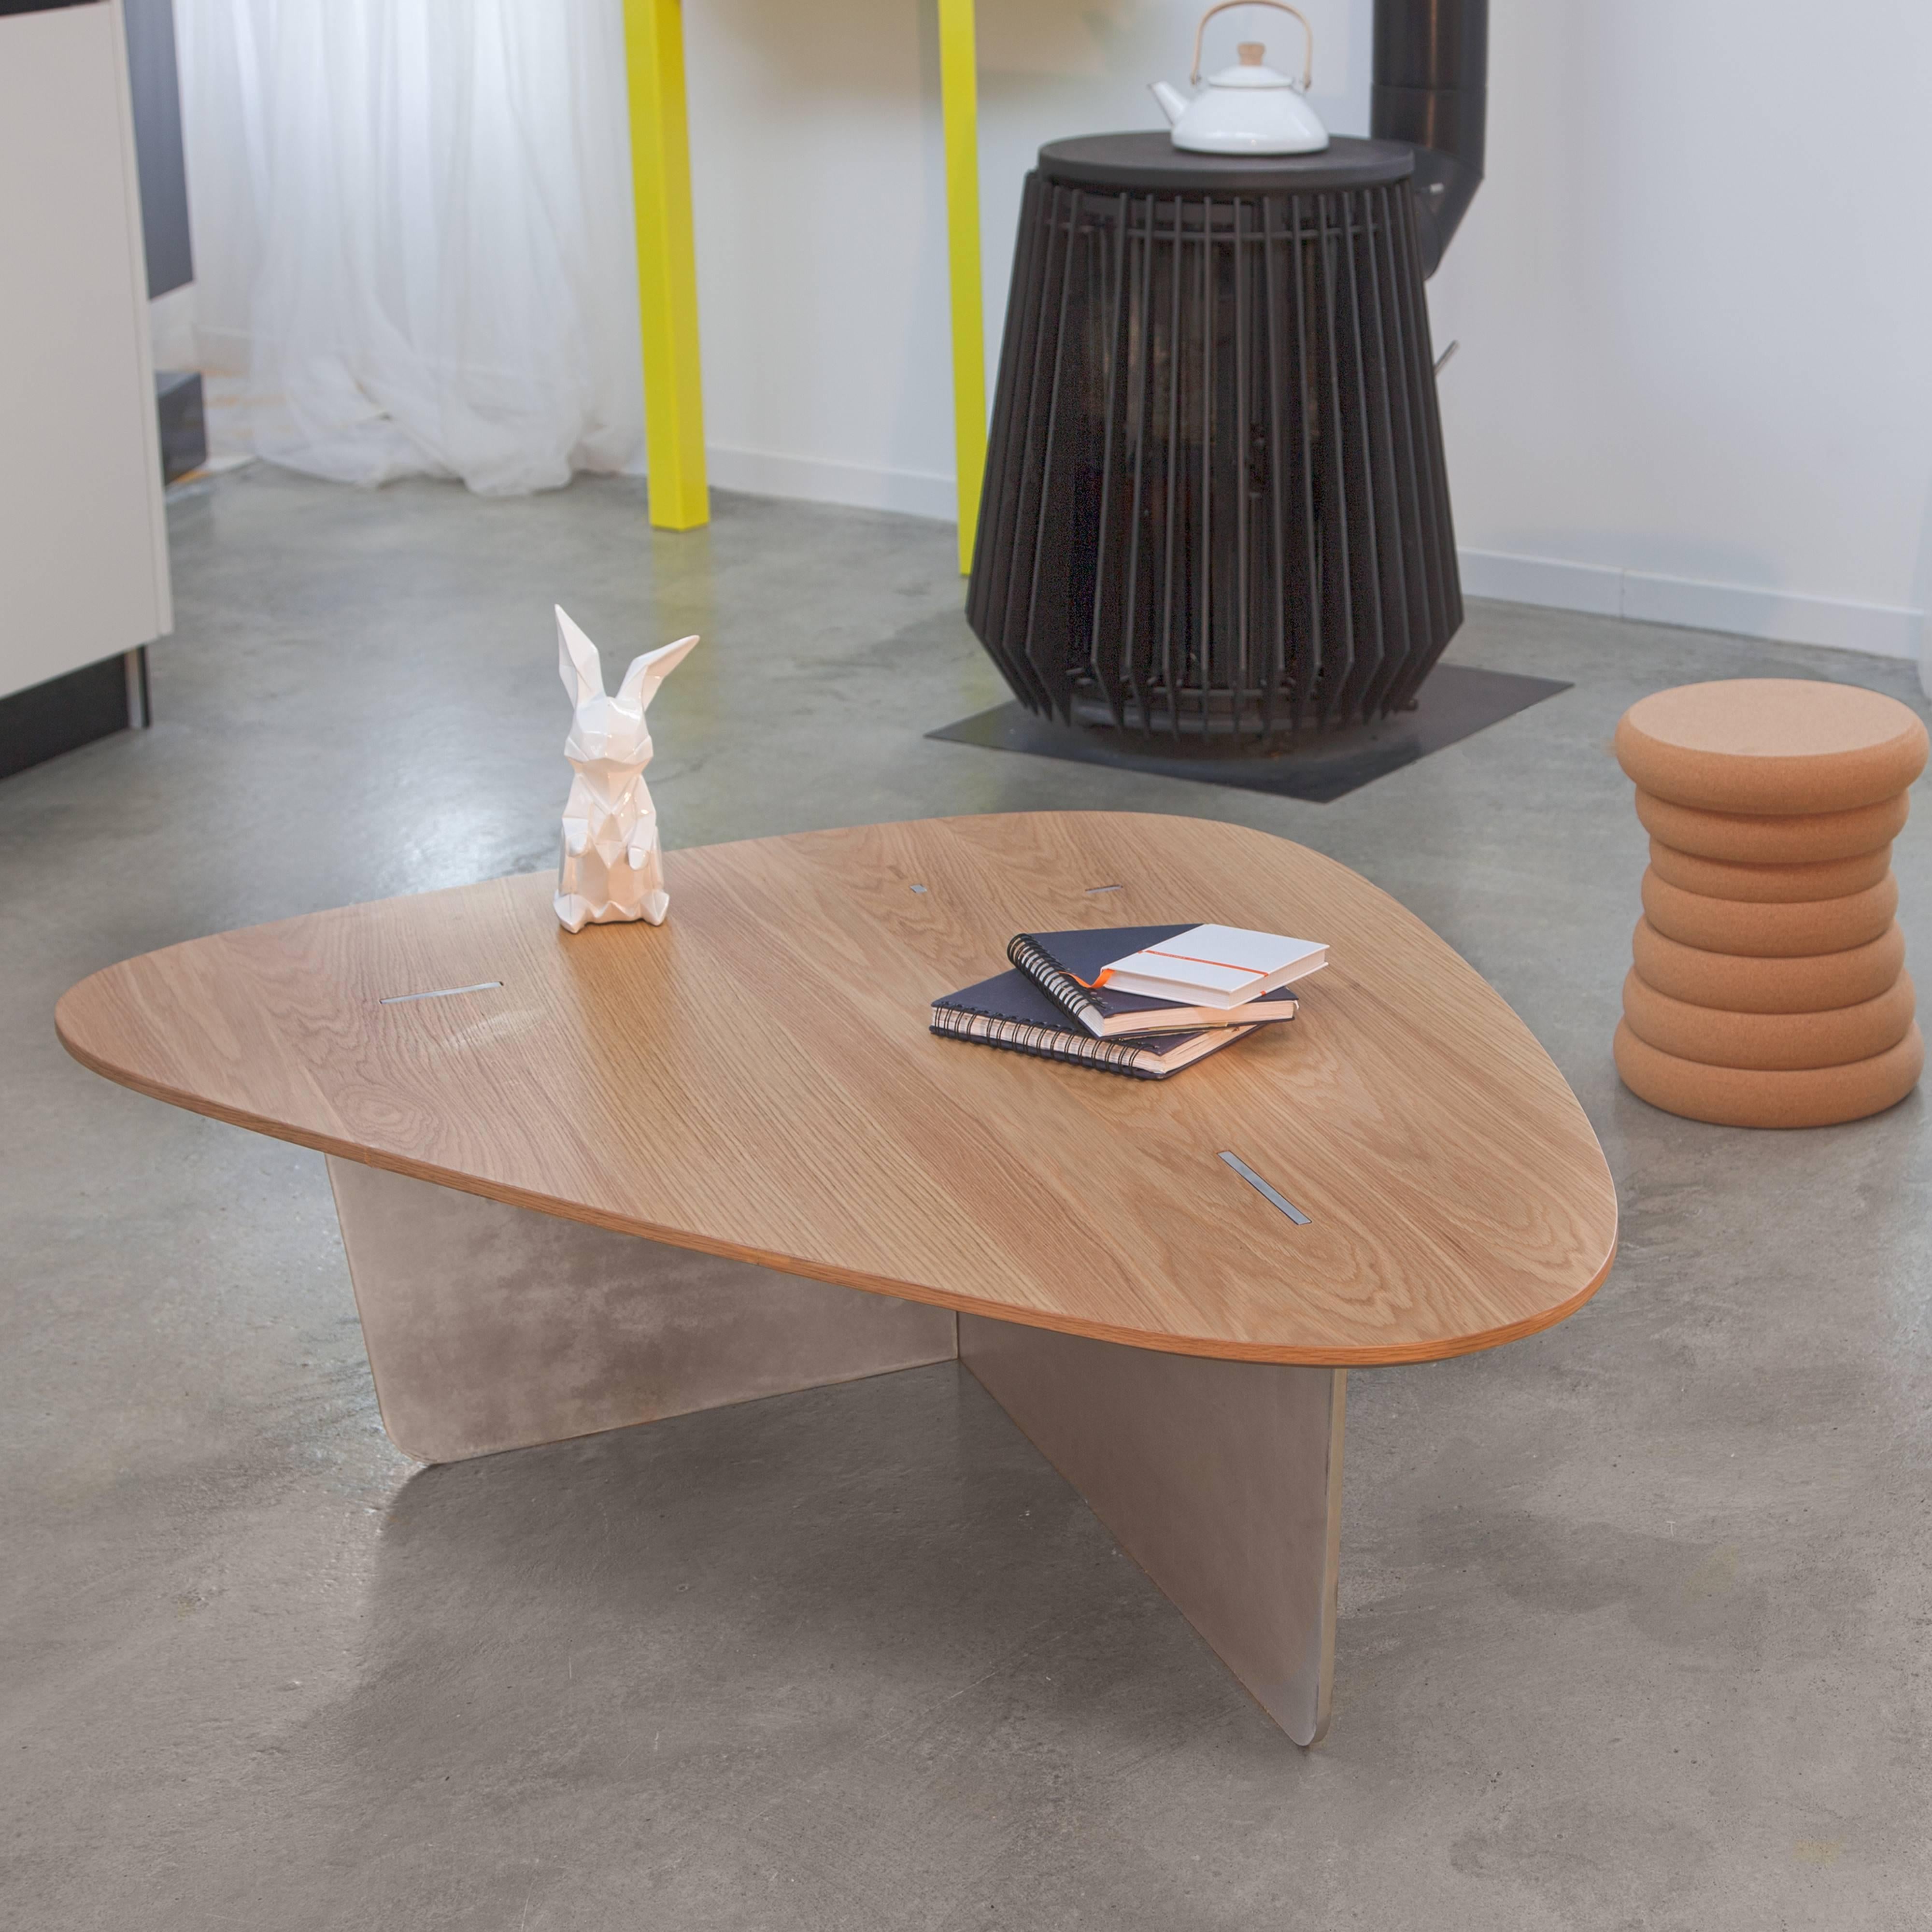 UFO alert! Aero is flying over your living room.
Its laser cut metal leg, seems to slightly levitate over the floor.
It comes perfectly on the surface of the wooden top for a combination of two kind of raw materials. Successful alliance between